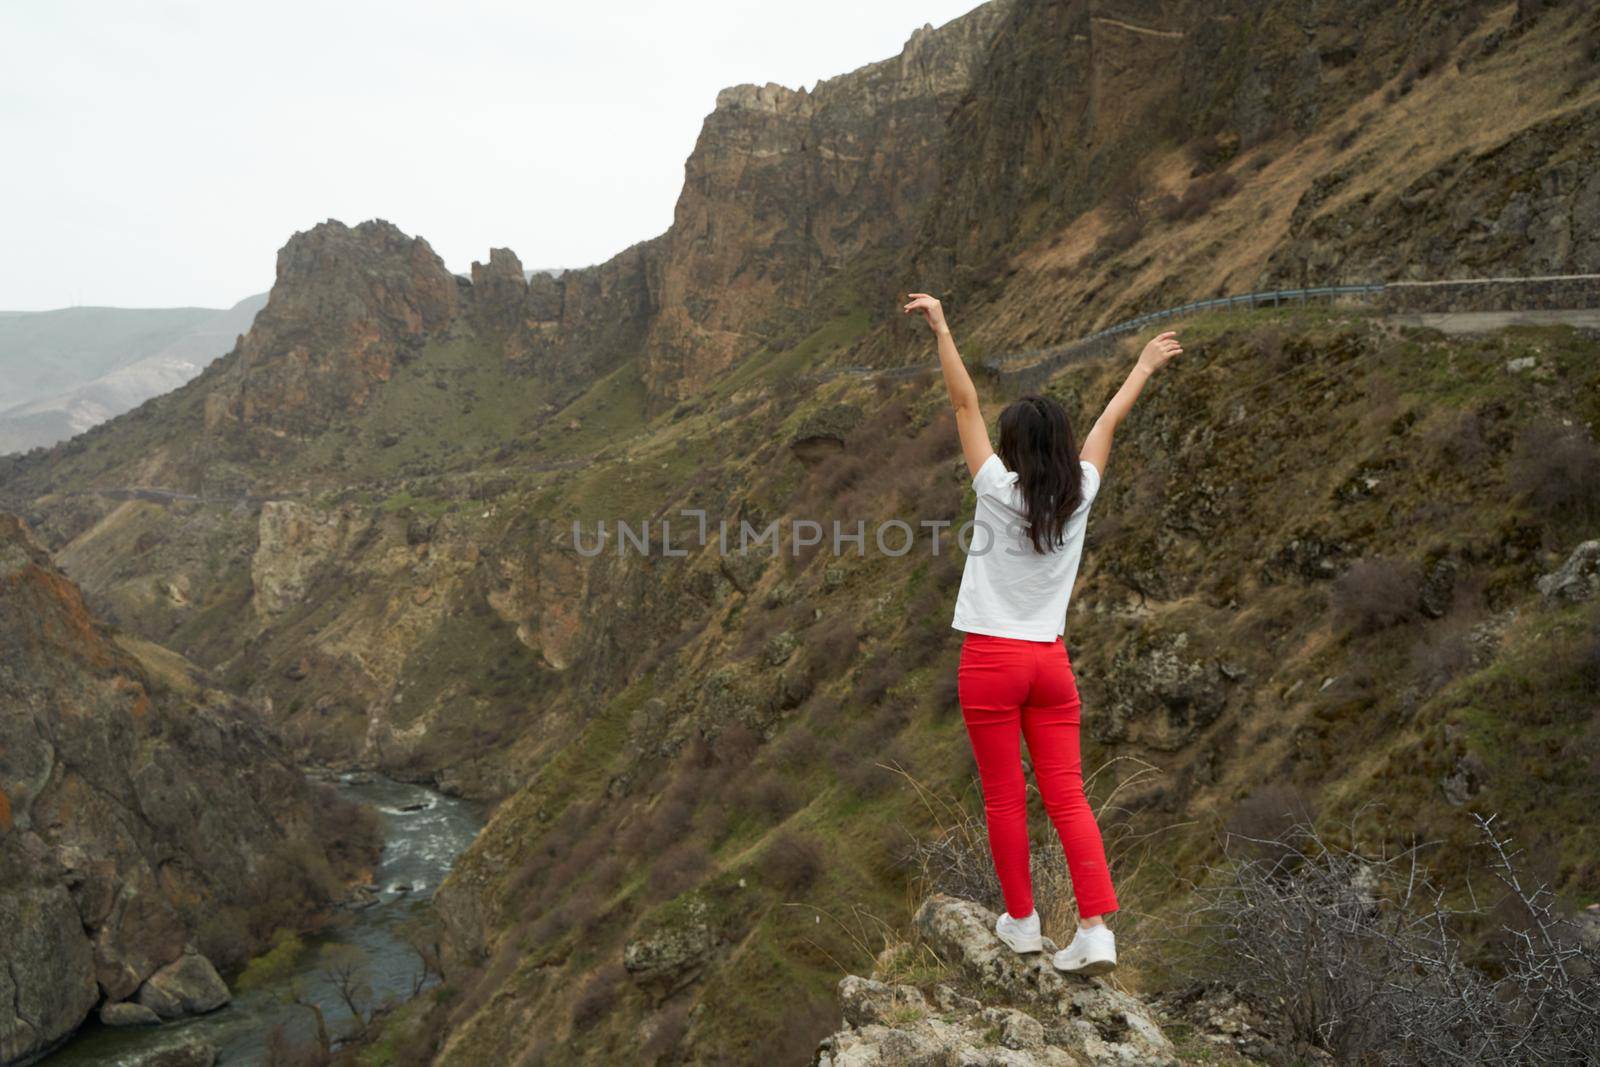 A girl poses on a cliff with a breathtaking view of the gorge in which the river flows. Picturesque photos of mountains by Try_my_best